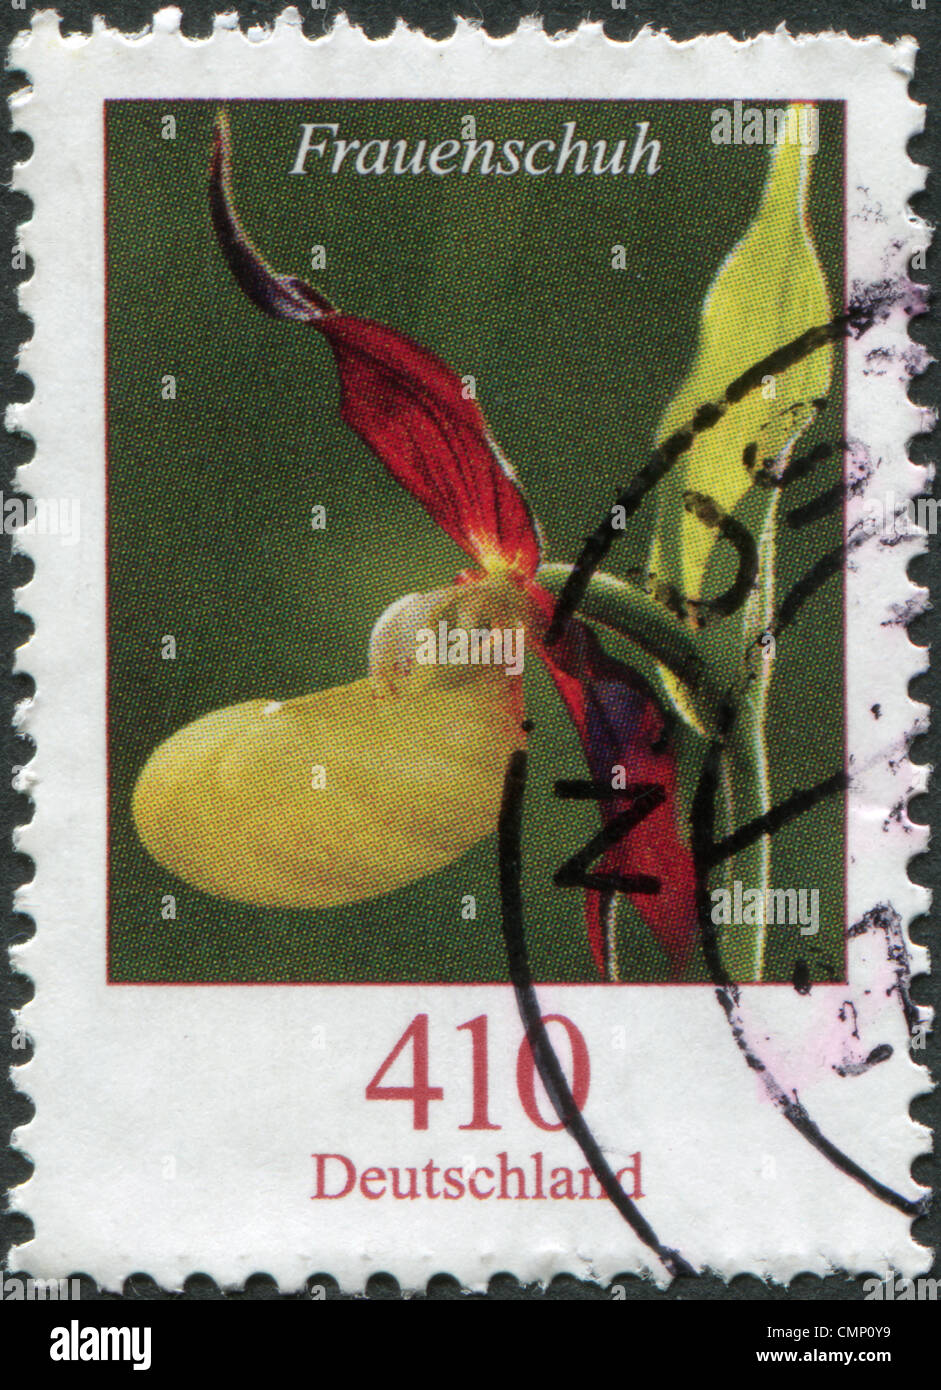 GERMANY - CIRCA 2010: A stamp printed in Germany, shows a flower, Cypripedium candidum, circa 2010 Stock Photo